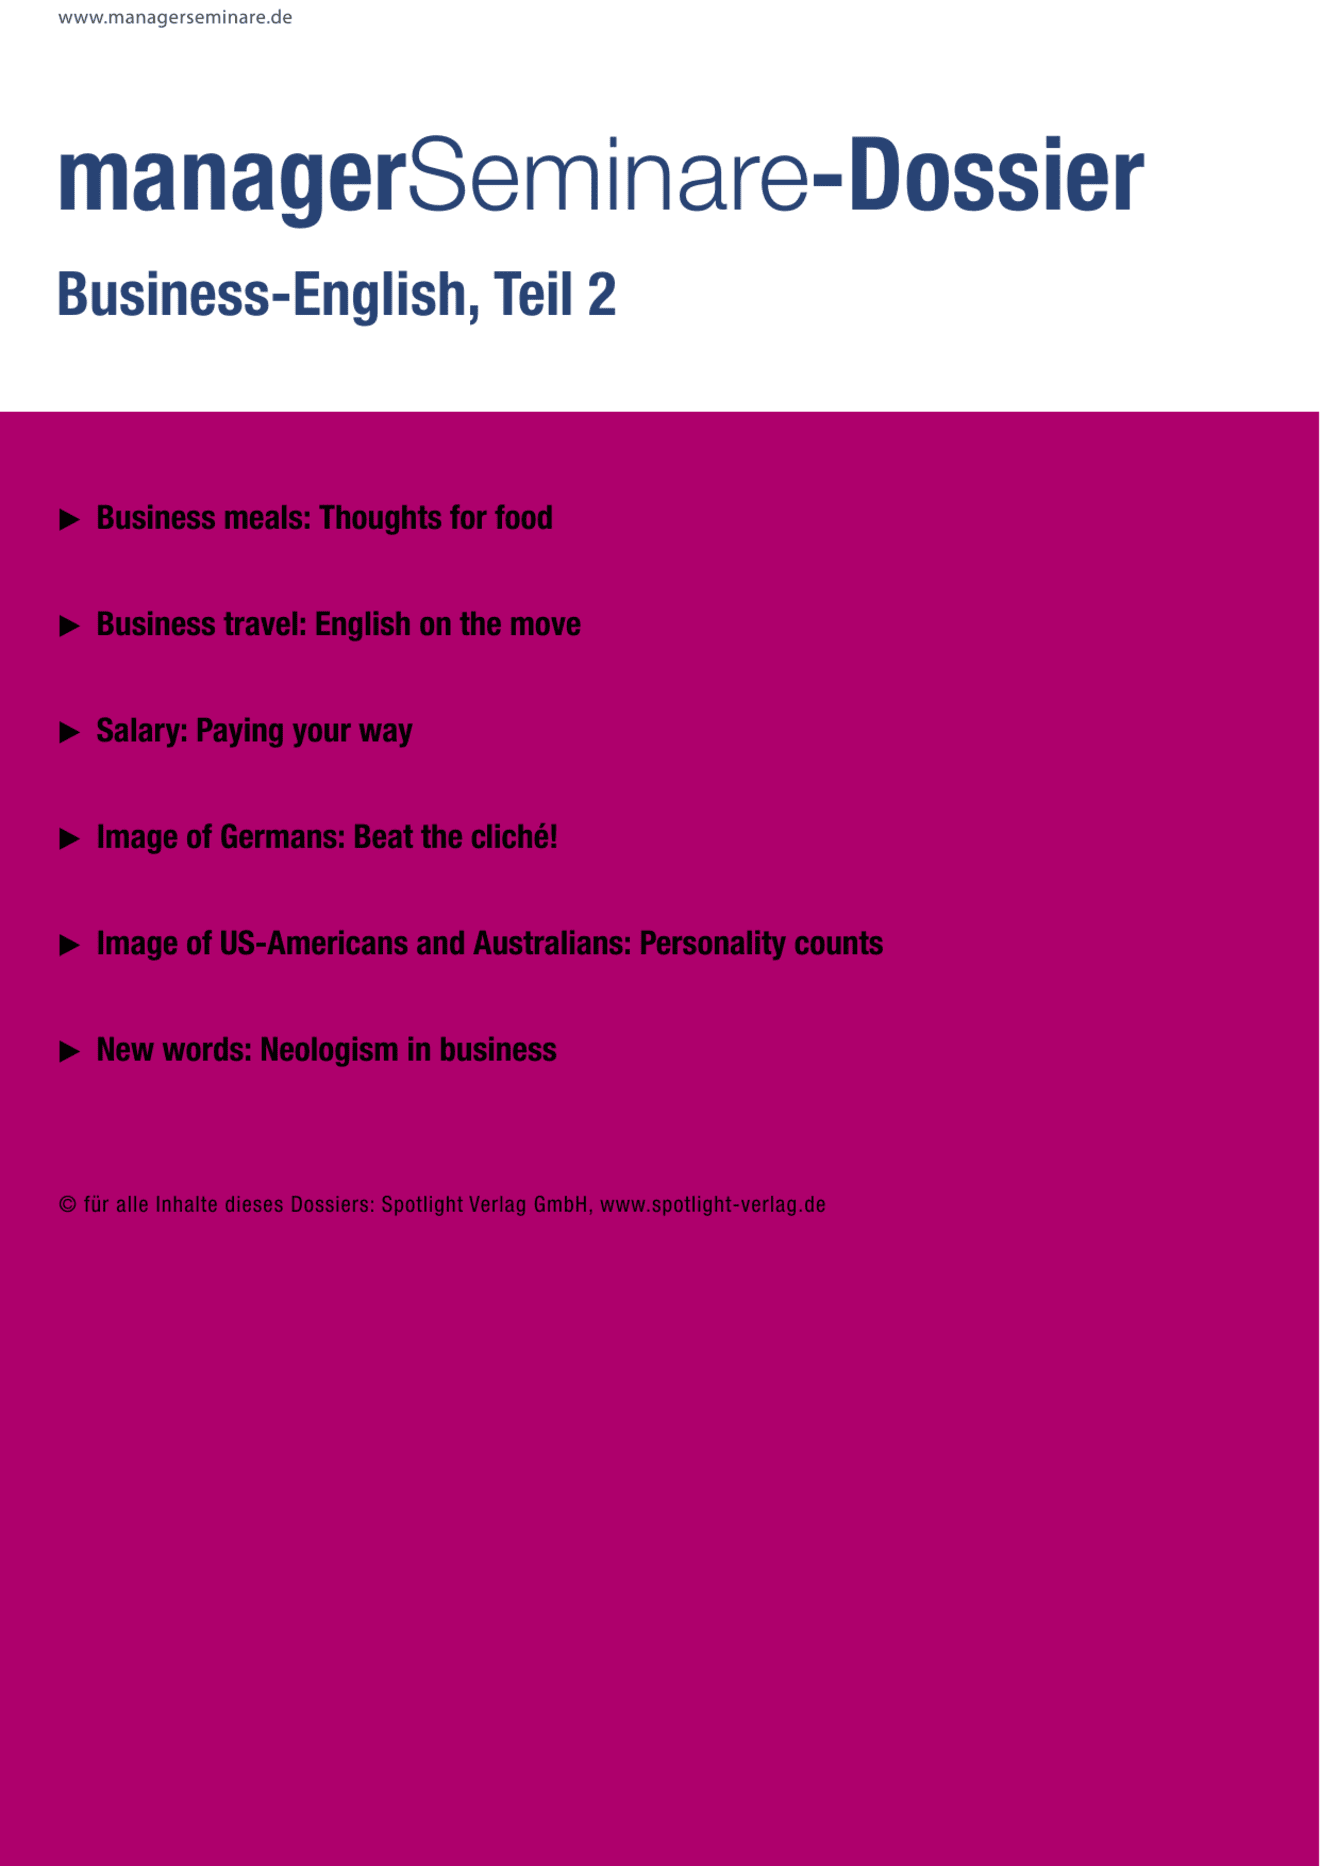 Dossier Business-English, Teil 2